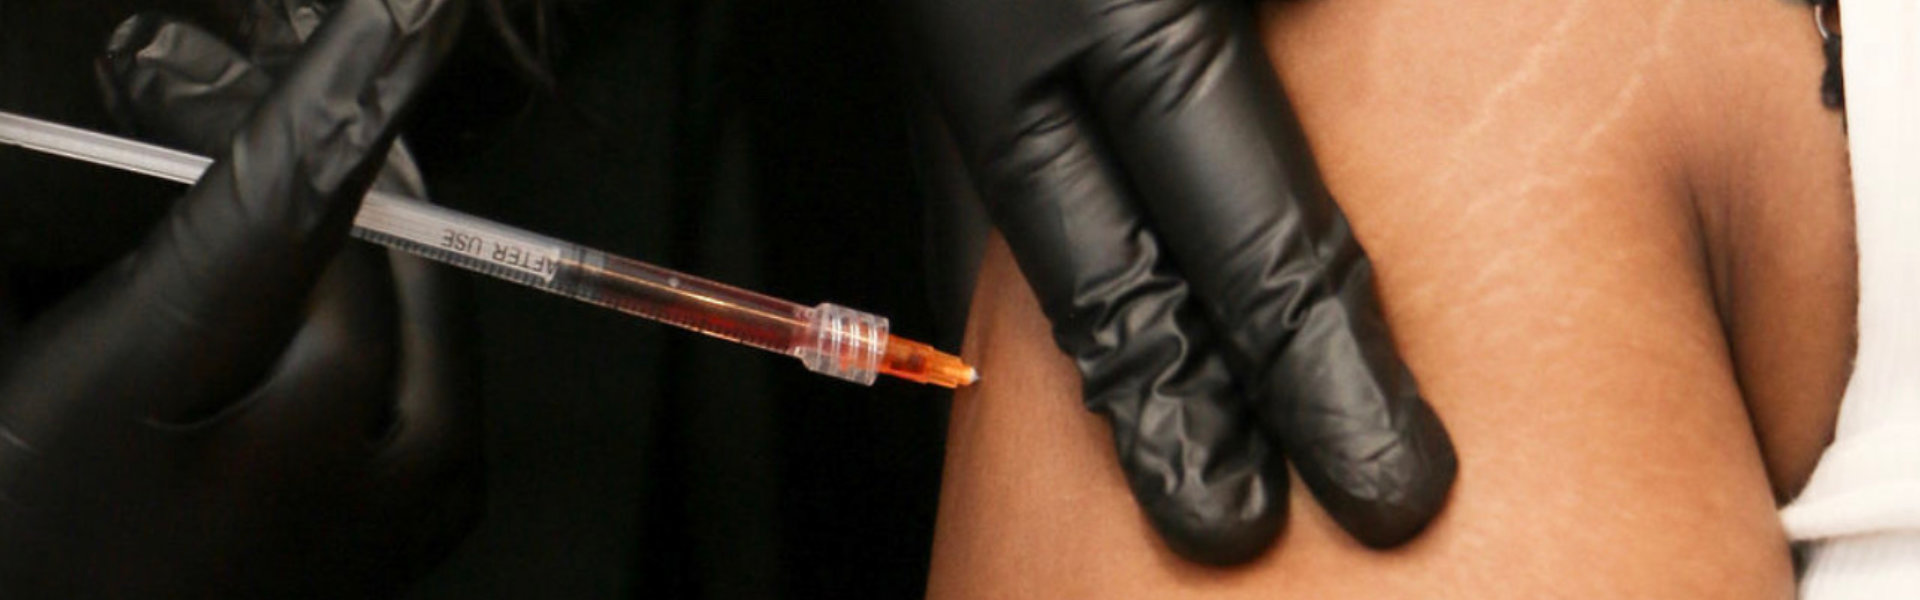 close up view of injection process